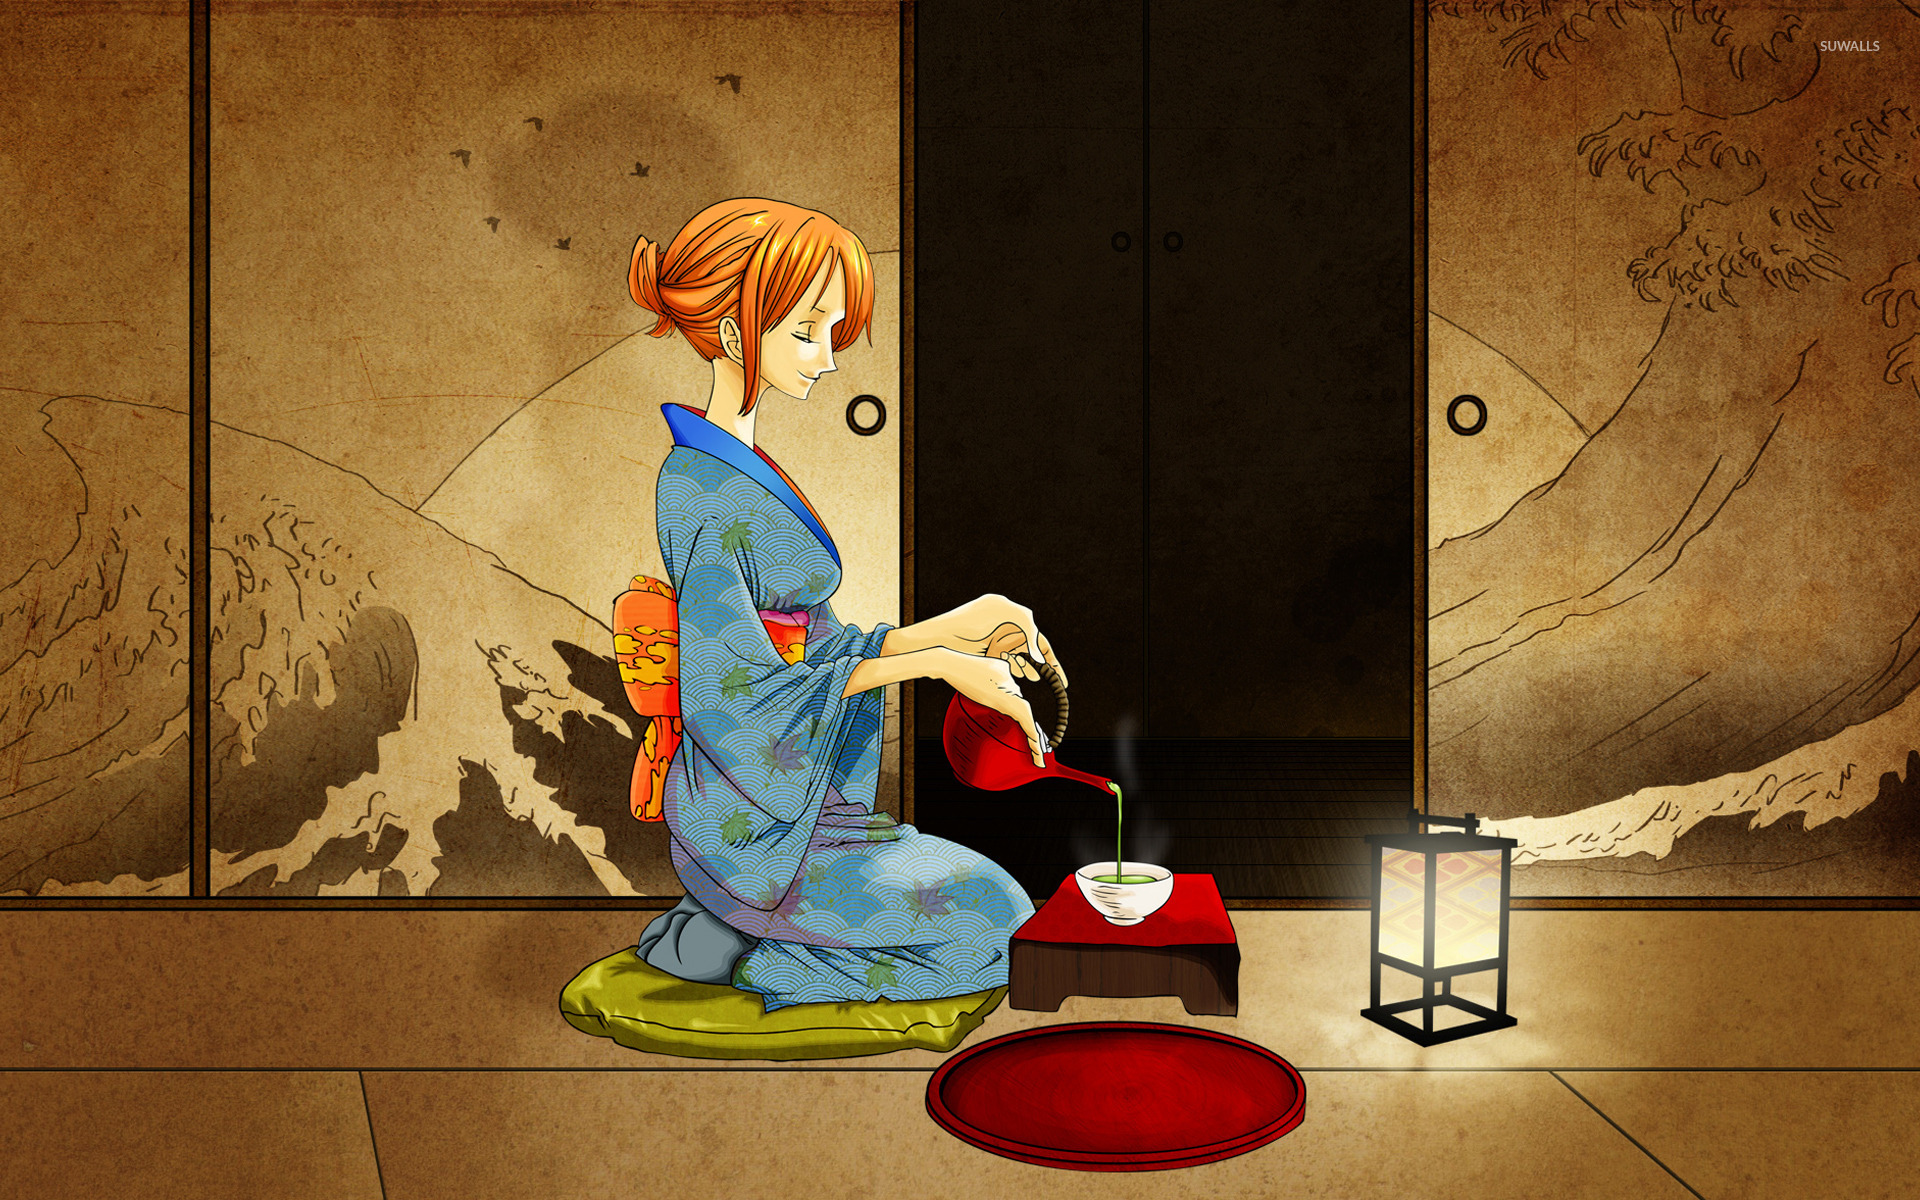 Wallpaper  onepiece Nami picture in picture One Piece 1920x1080   HanaSama  1943489  HD Wallpapers  WallHere